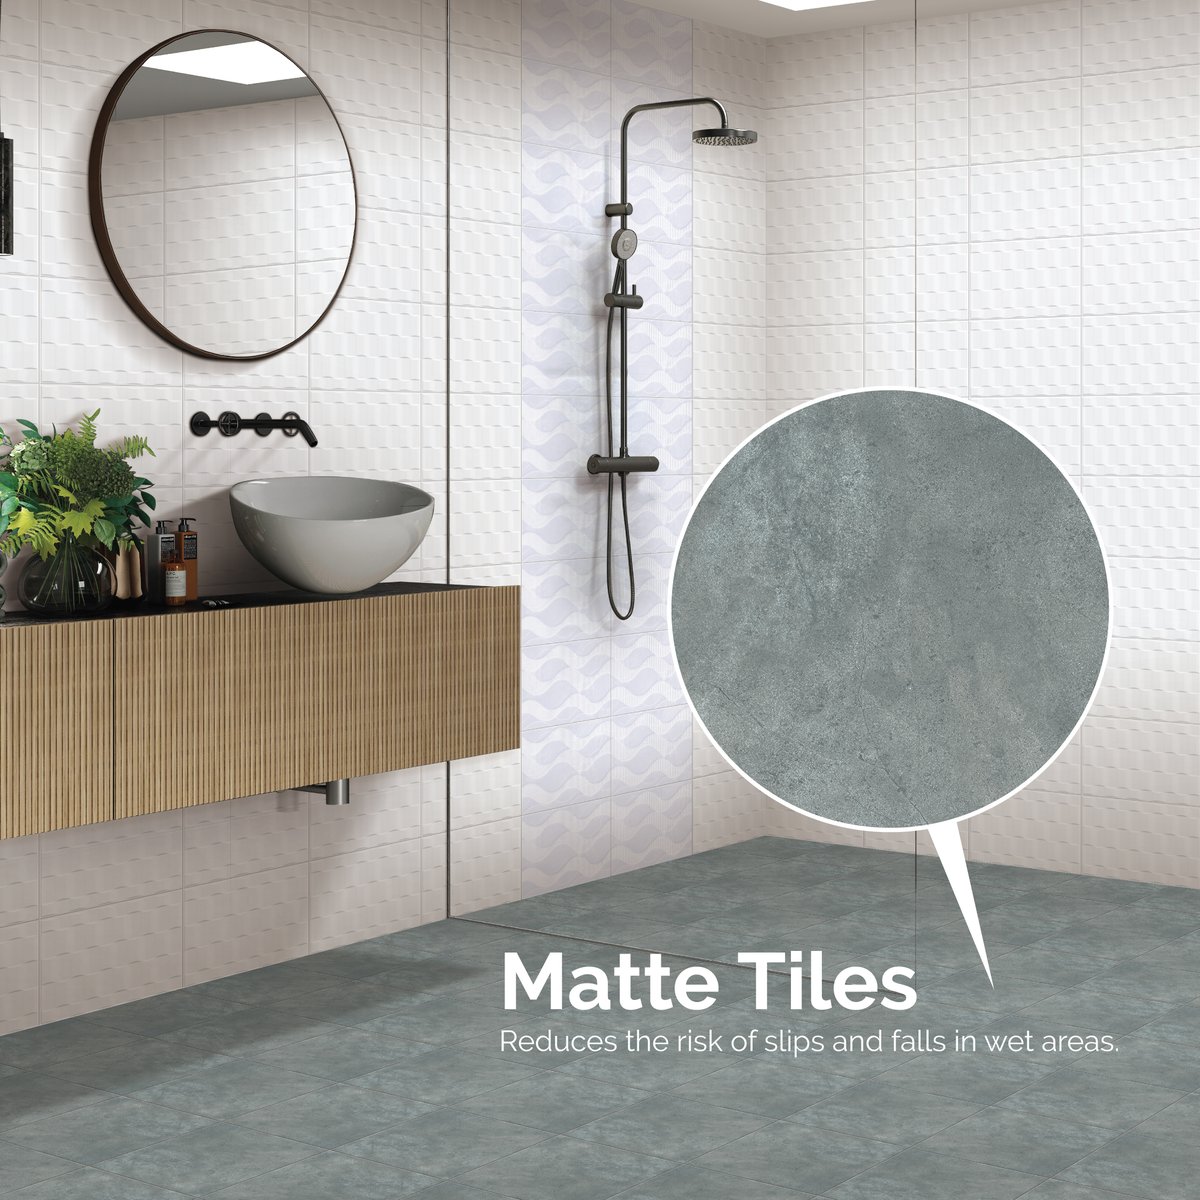 Matte tiles offer superior traction, reducing the risk of slips and falls, especially in wet areas like bathrooms and kitchens.

#TwyfordOfficial #BetterTilesBetterLife #CeramicTiles #DreamHome #MatteTiles